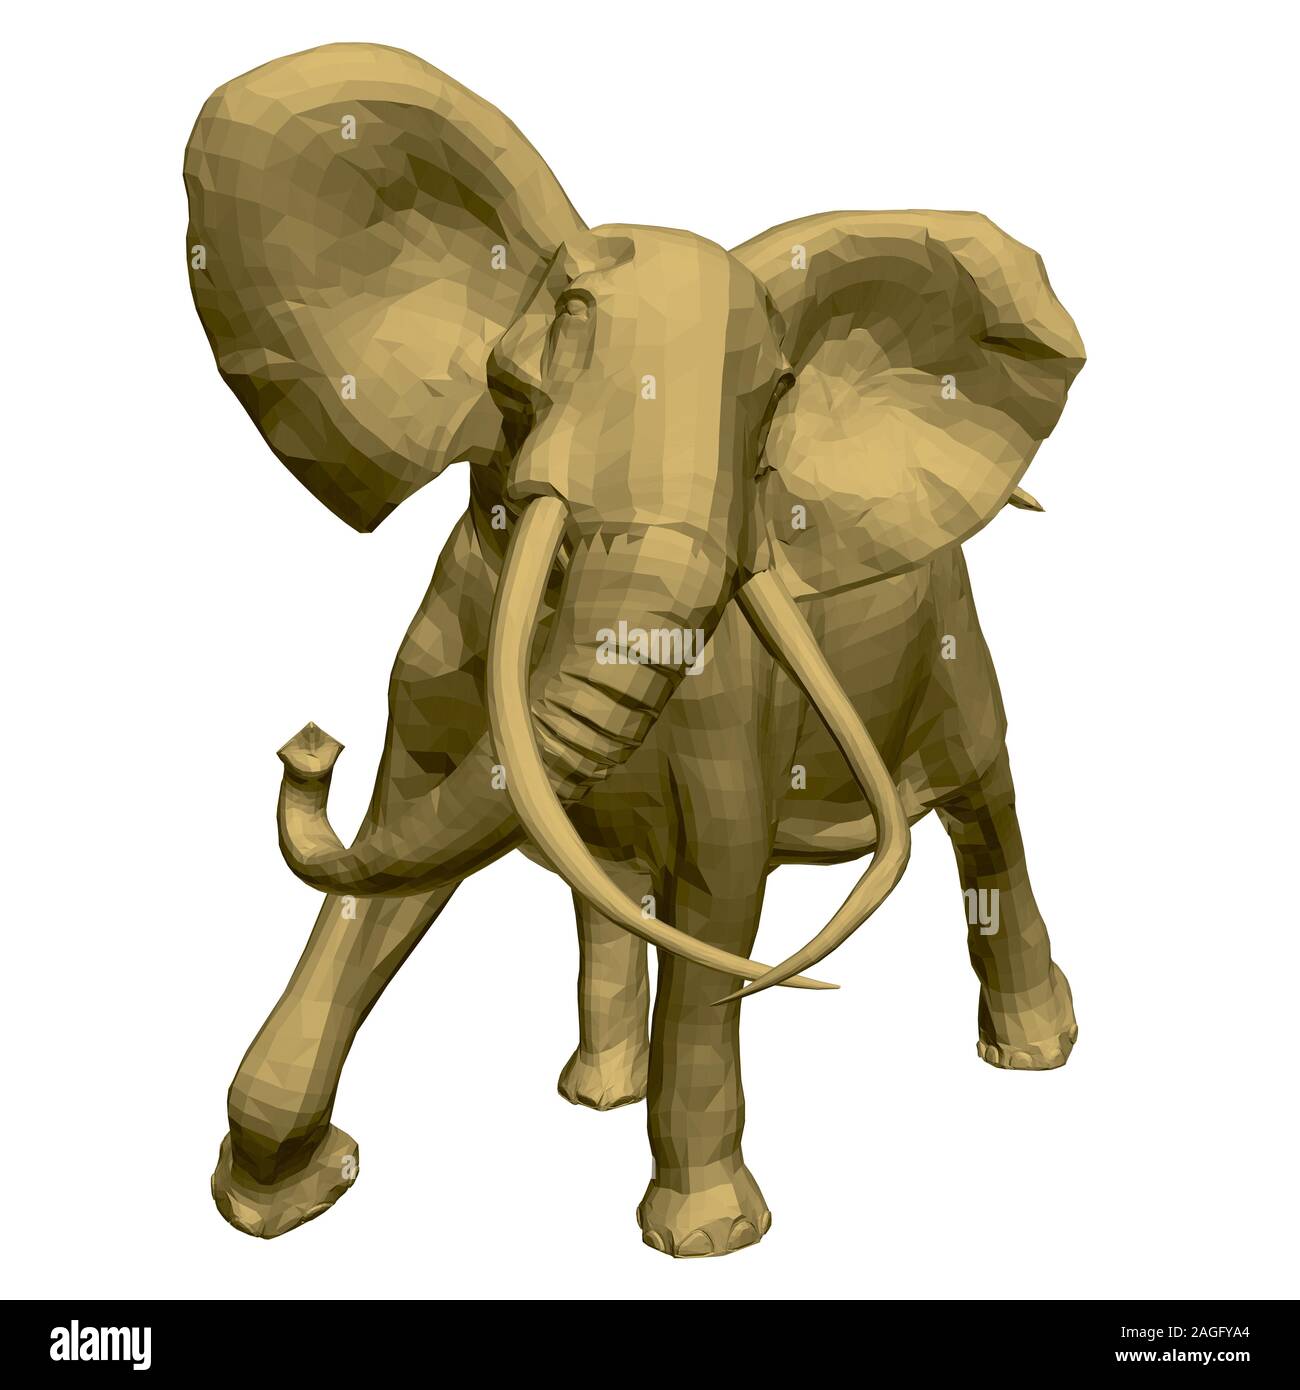 Polygonal golden elephant model. An elephant isolated on a white background walks waving tusks and a trunk. 3D. Vector illustration. Stock Vector